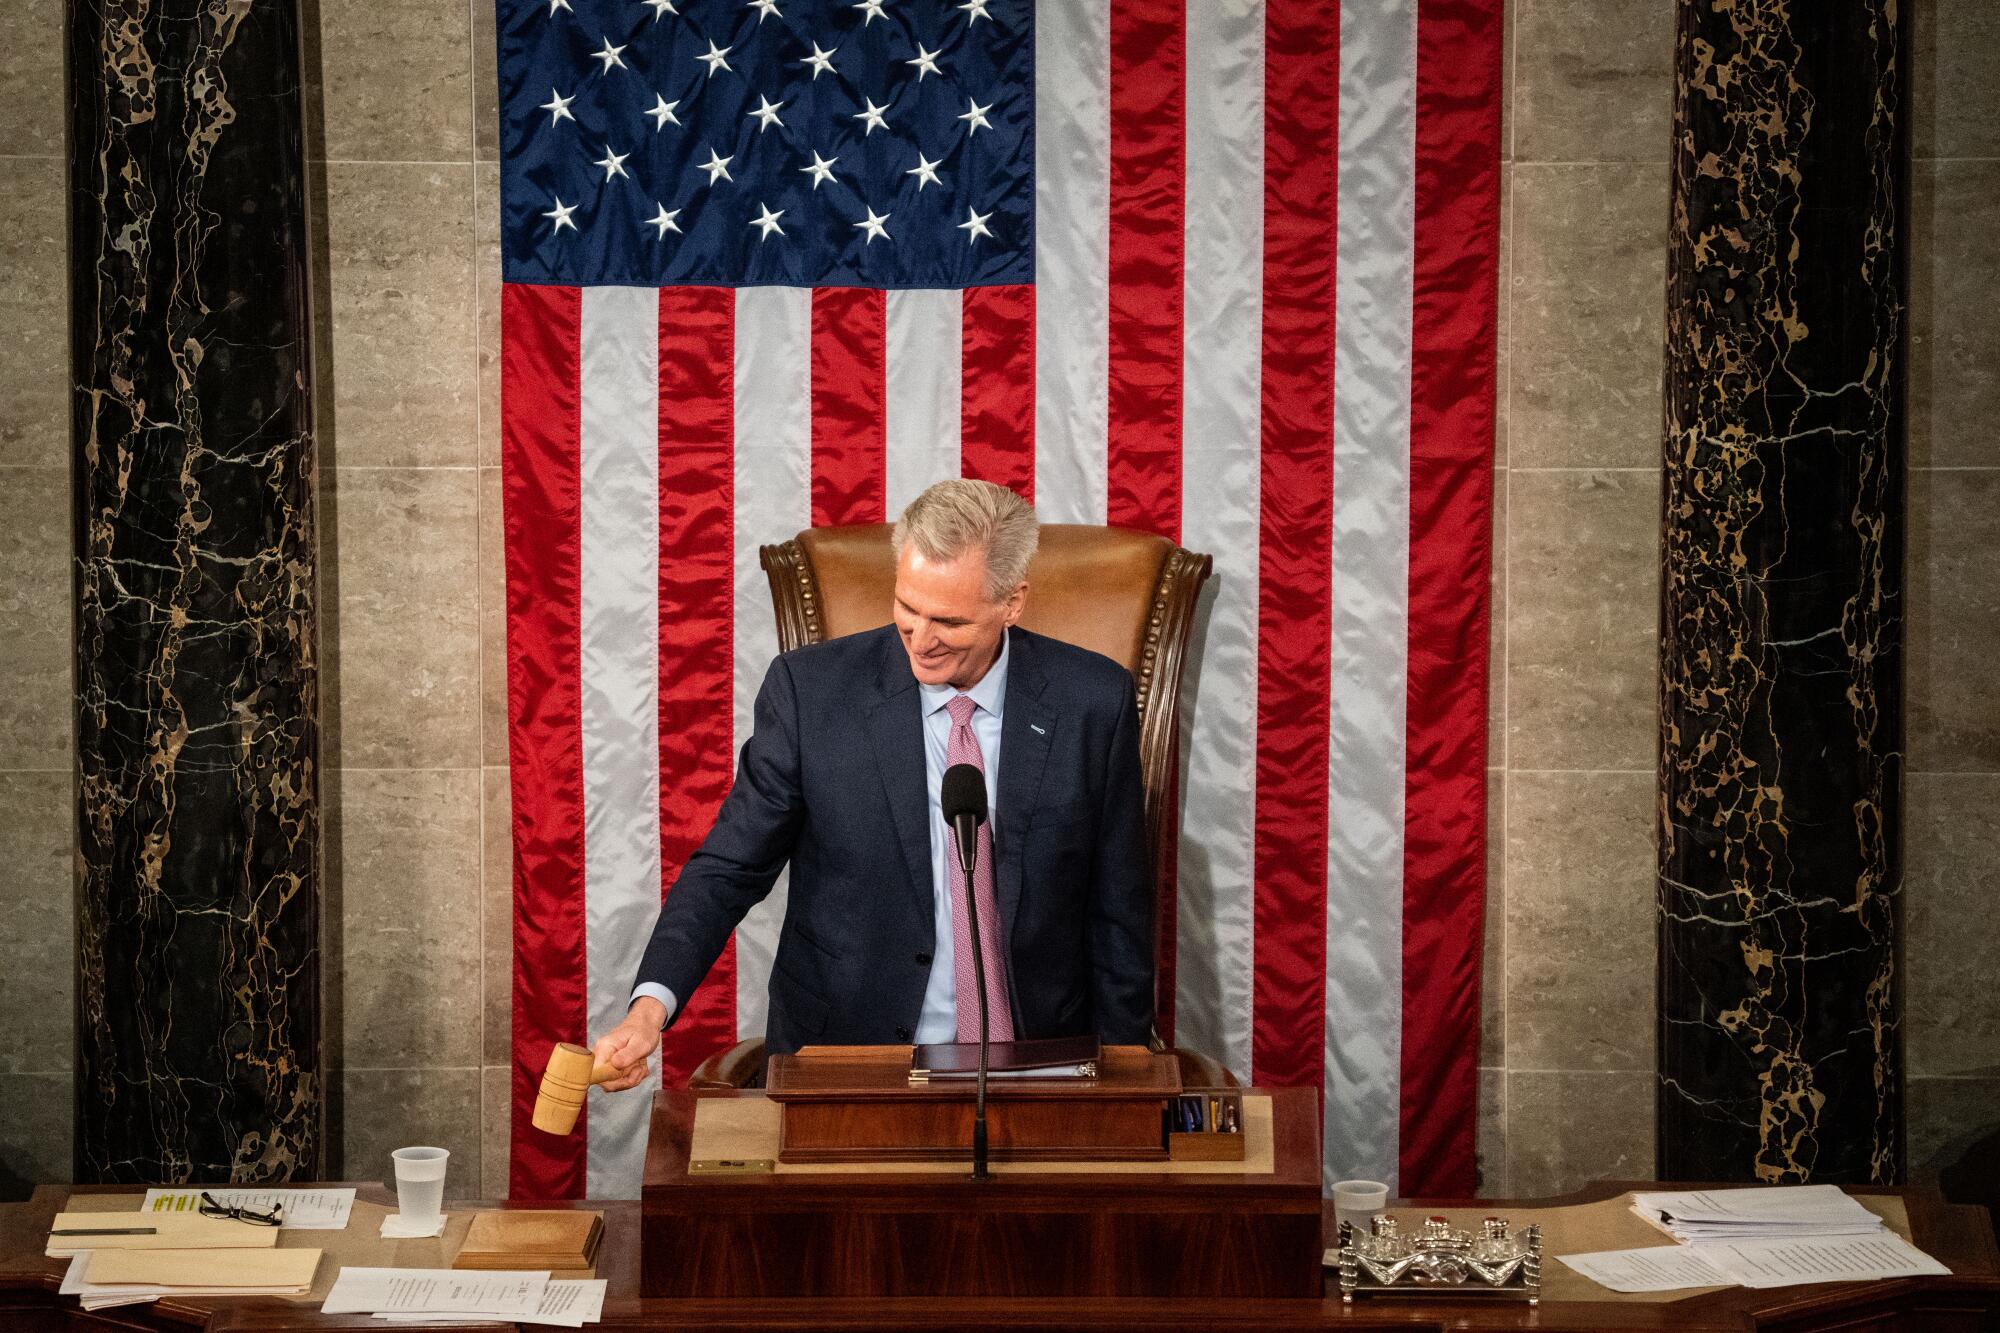 A man in a suit bangs a gavel while standing at a lectern in front of the U.S. flag.